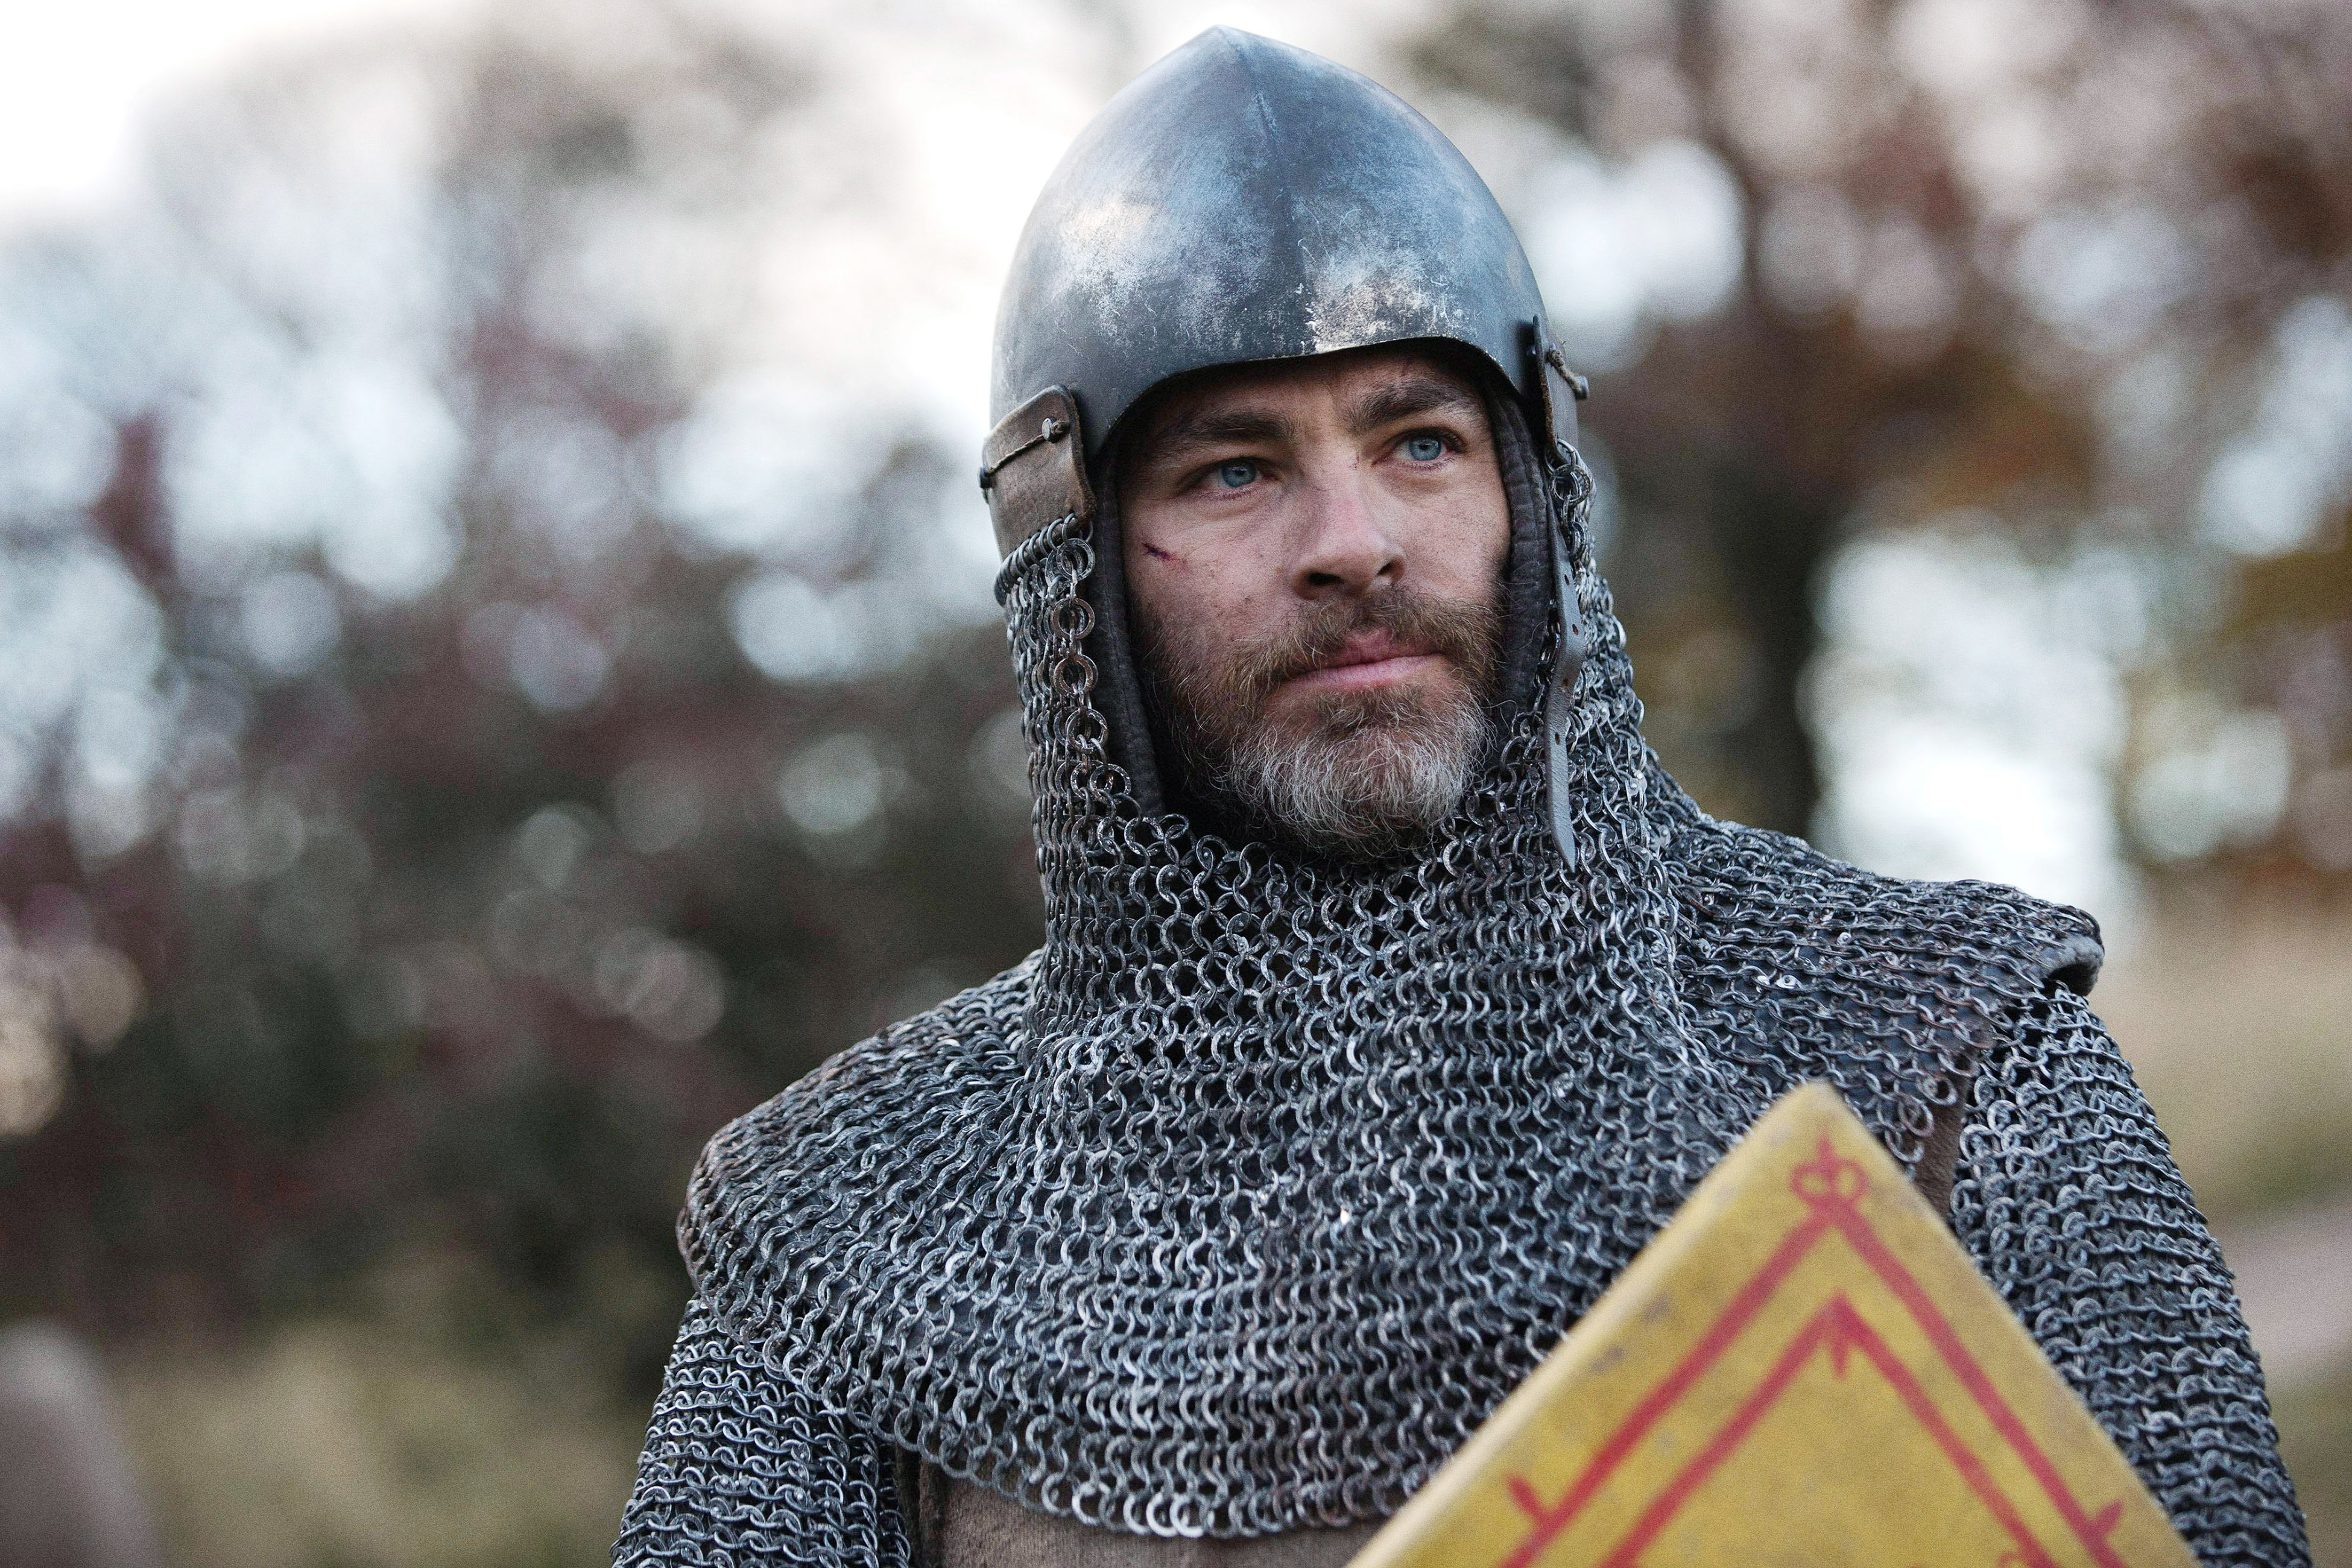 A rugged, bearded man, wearing chainmail and carrying a shield.